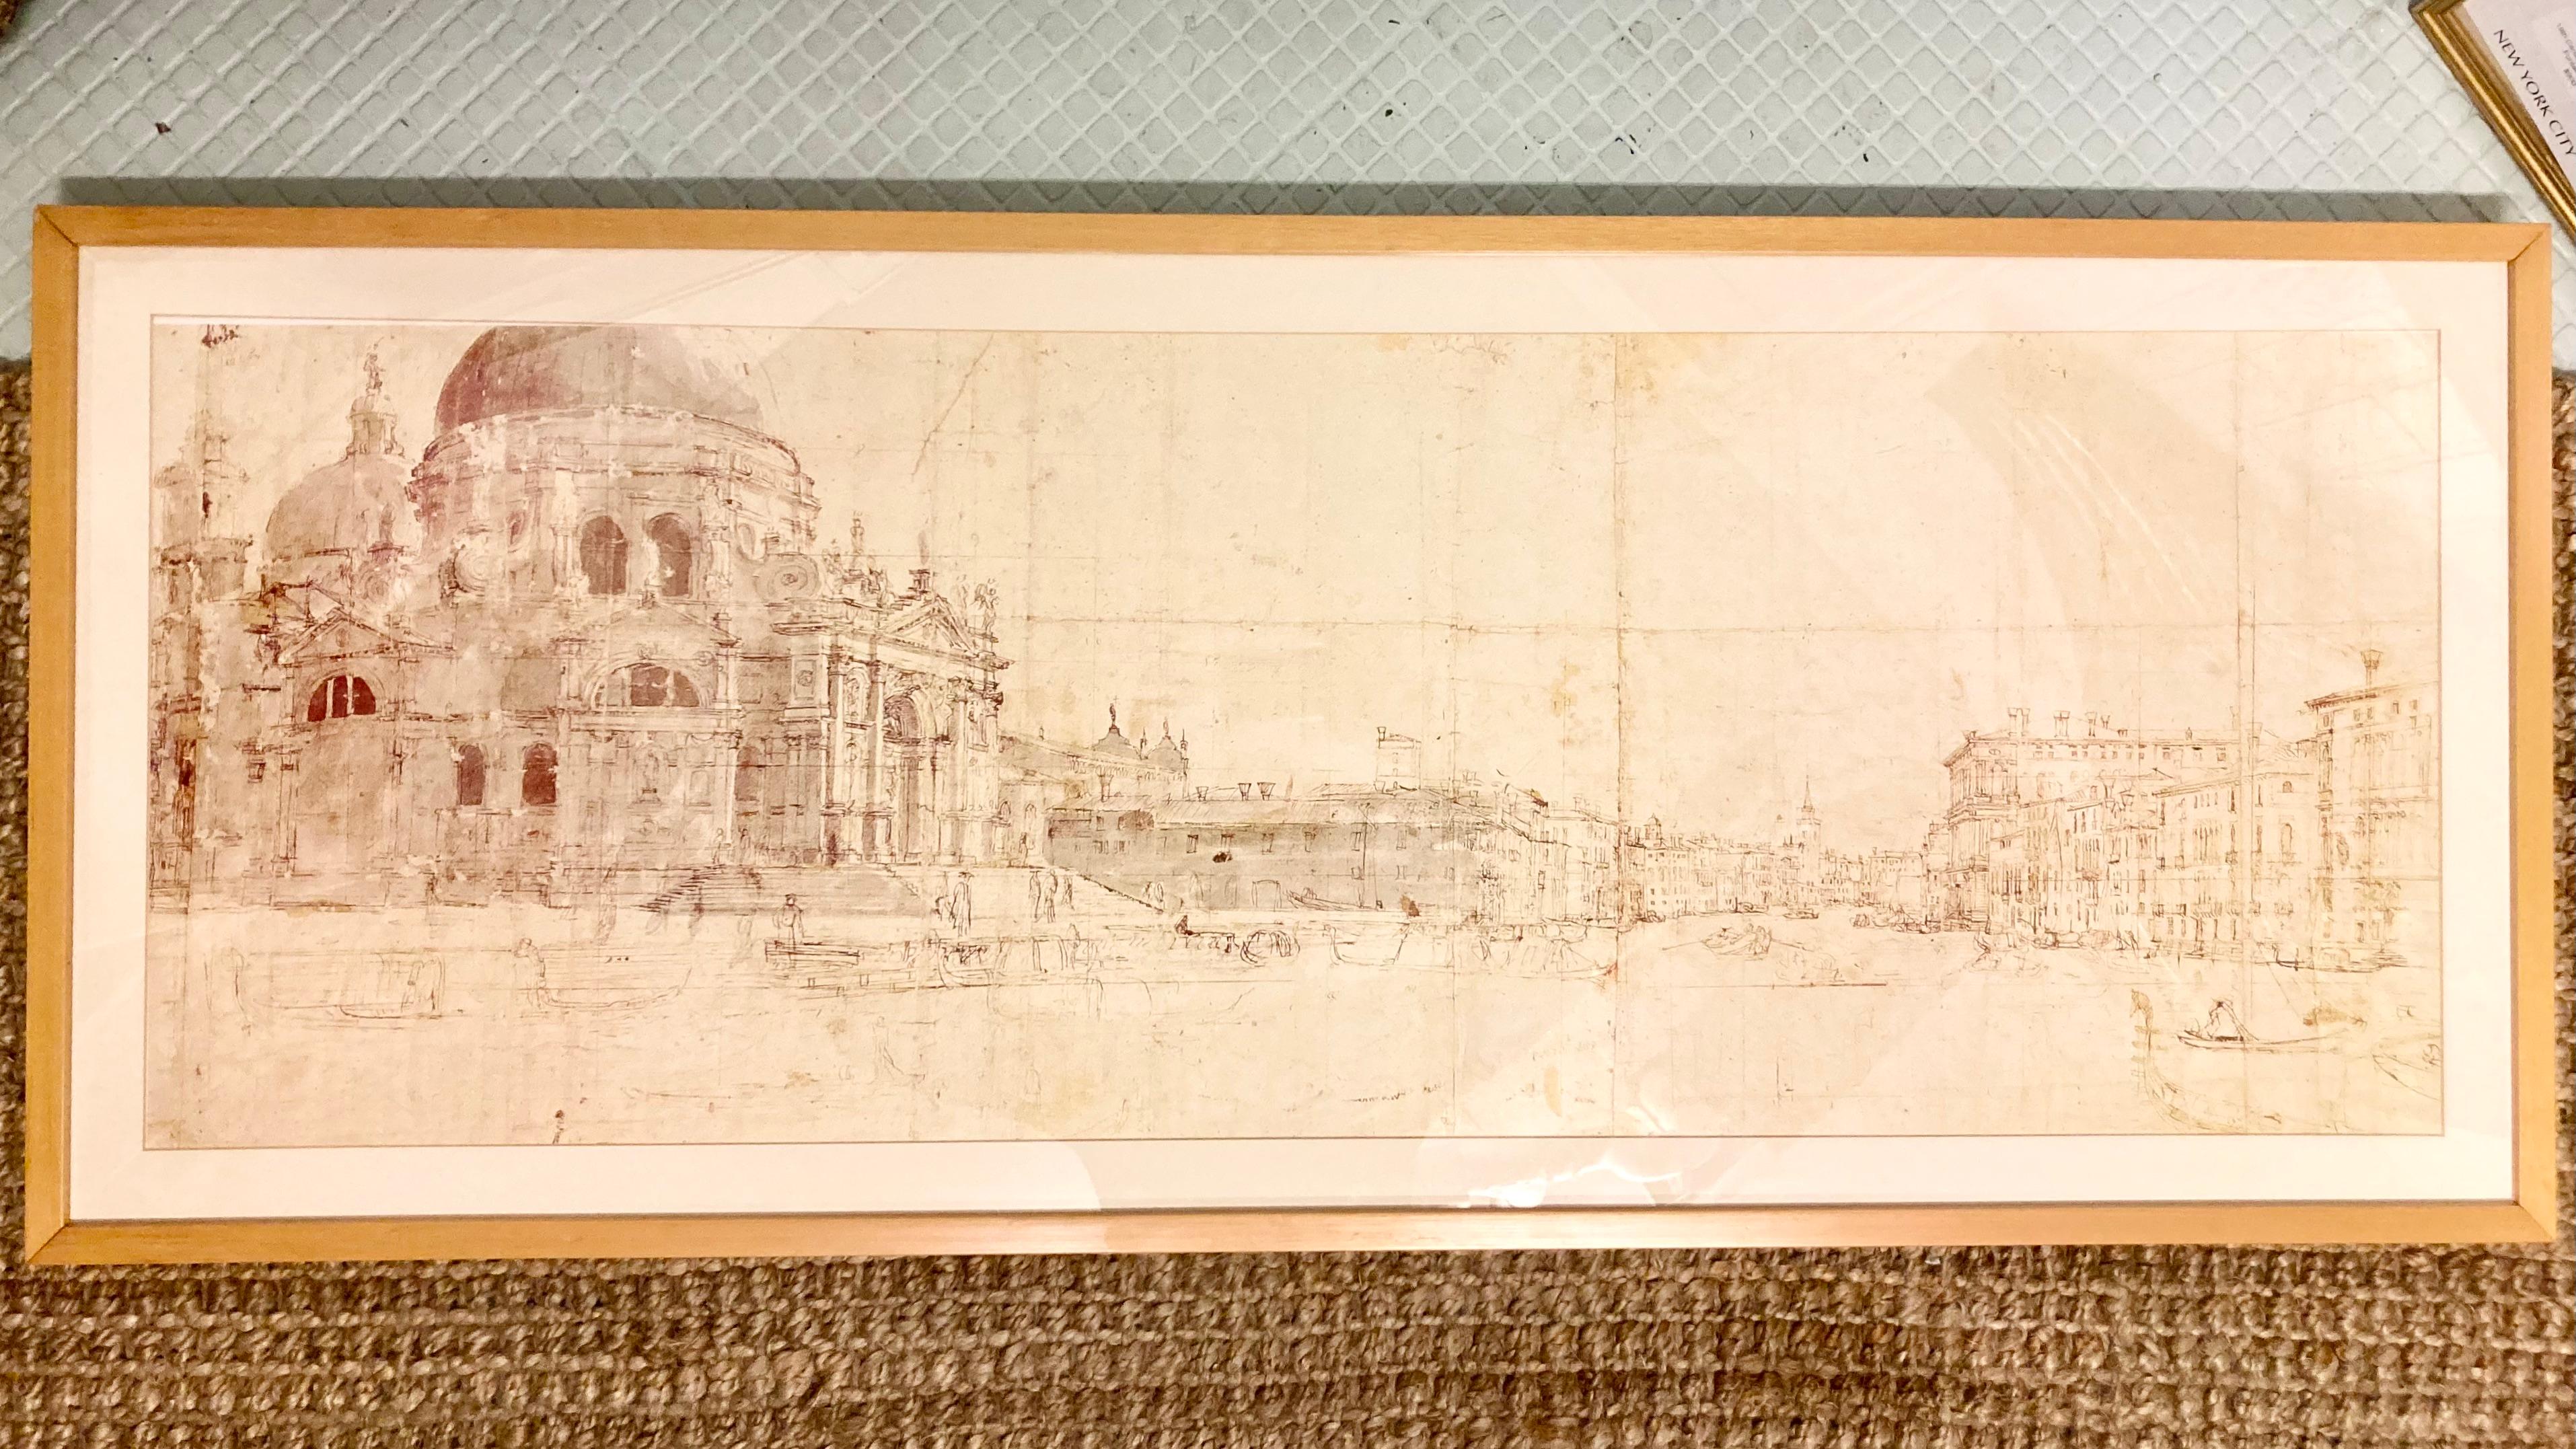 Beautiful Venice rectangular etching art piece in original frame. Very unusual sepia tone etching. Nice modern simple natural wood frame. Great addition to your classical inspired interiors. 